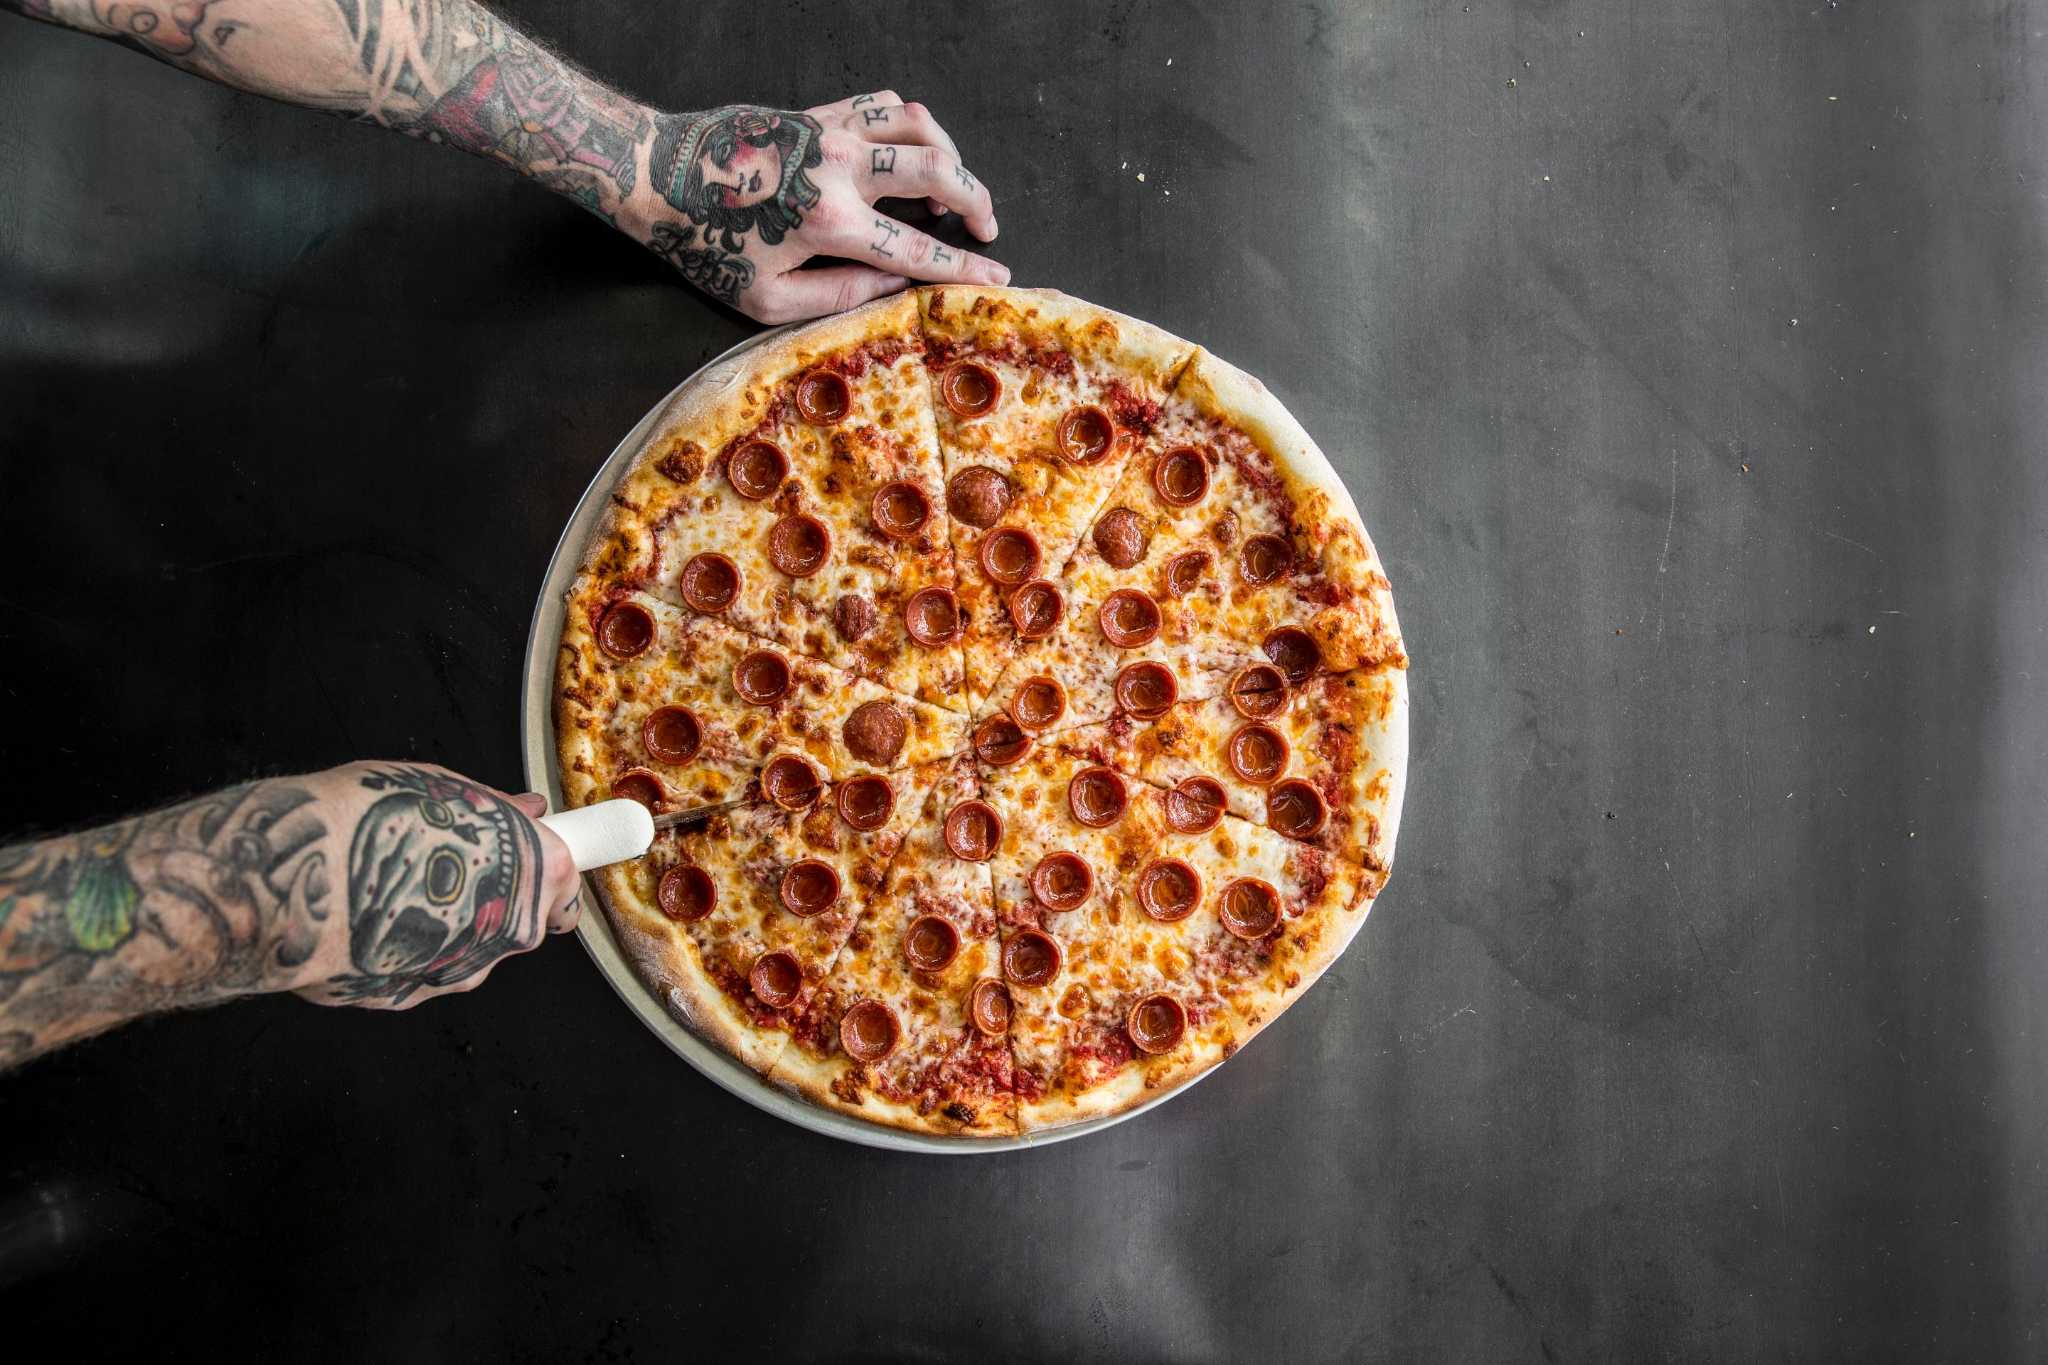 Houston's Pi Pizza named among Food Network's best ...